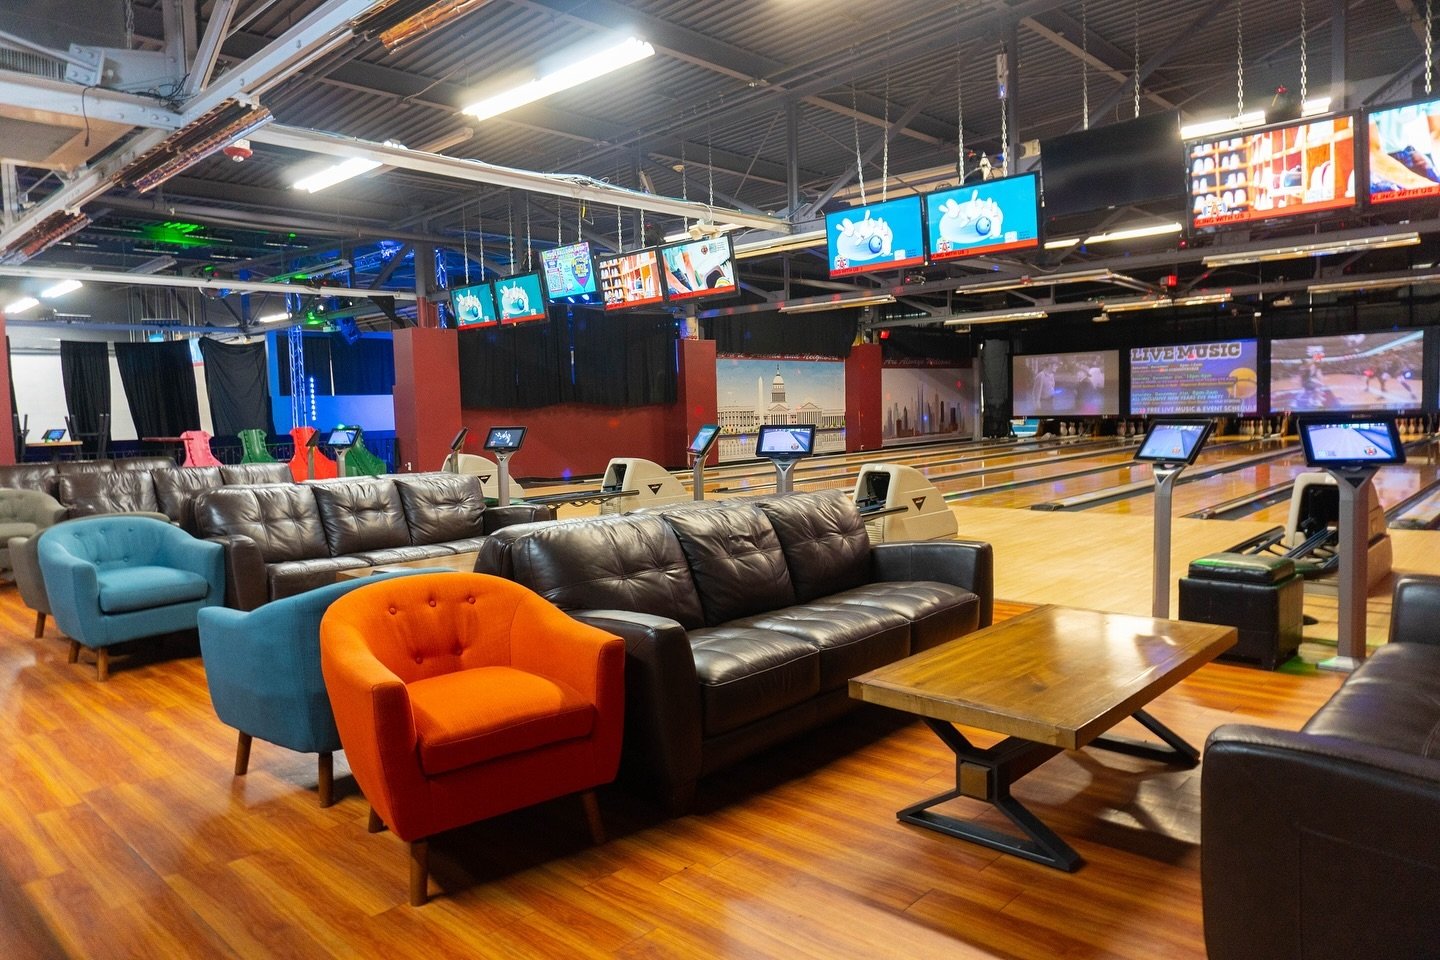 🎳Meet: VIP BOWLING 😎

Our VIP bowling is one of the best kept secretes at Arnolds! 

When available, you can bowl your heart out with friends and family in LUXURY for no extra cost!

🎸Swanky Mid Century Furniture and comfortable Leather couches ma